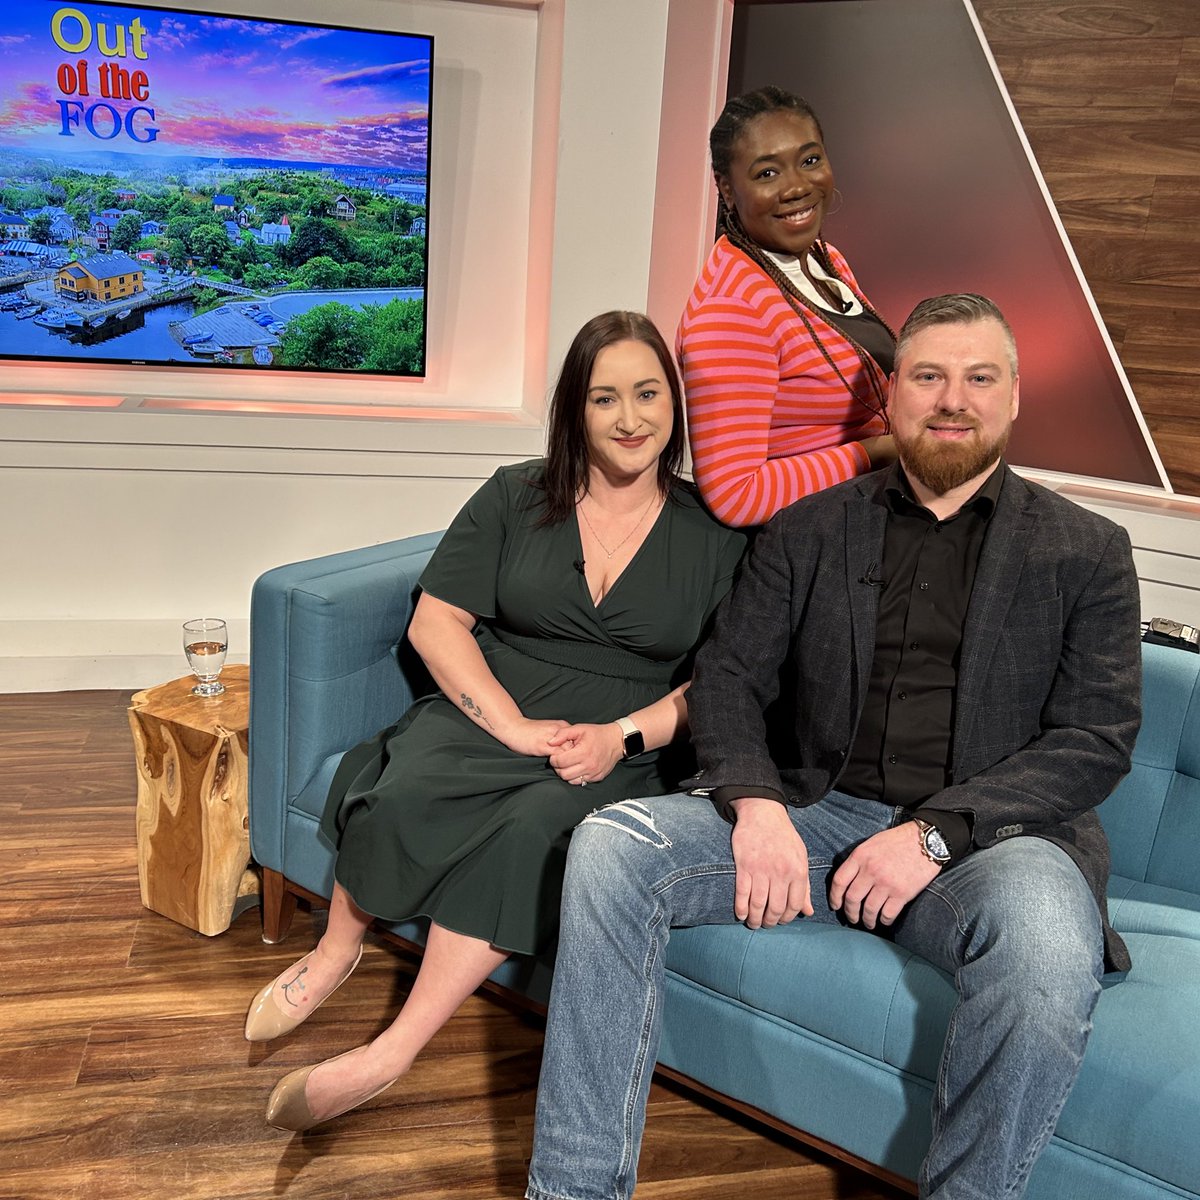 #Tonight on Out of the Fog, host Laurabel Mba welcomes Miss Achievement Newfoundland & Labrador 2022-23, Olivia Taylor and #Rogerstv #Volunteers Danielle Moulton and TJ Cook. Check it out tonight at 7:30pm!